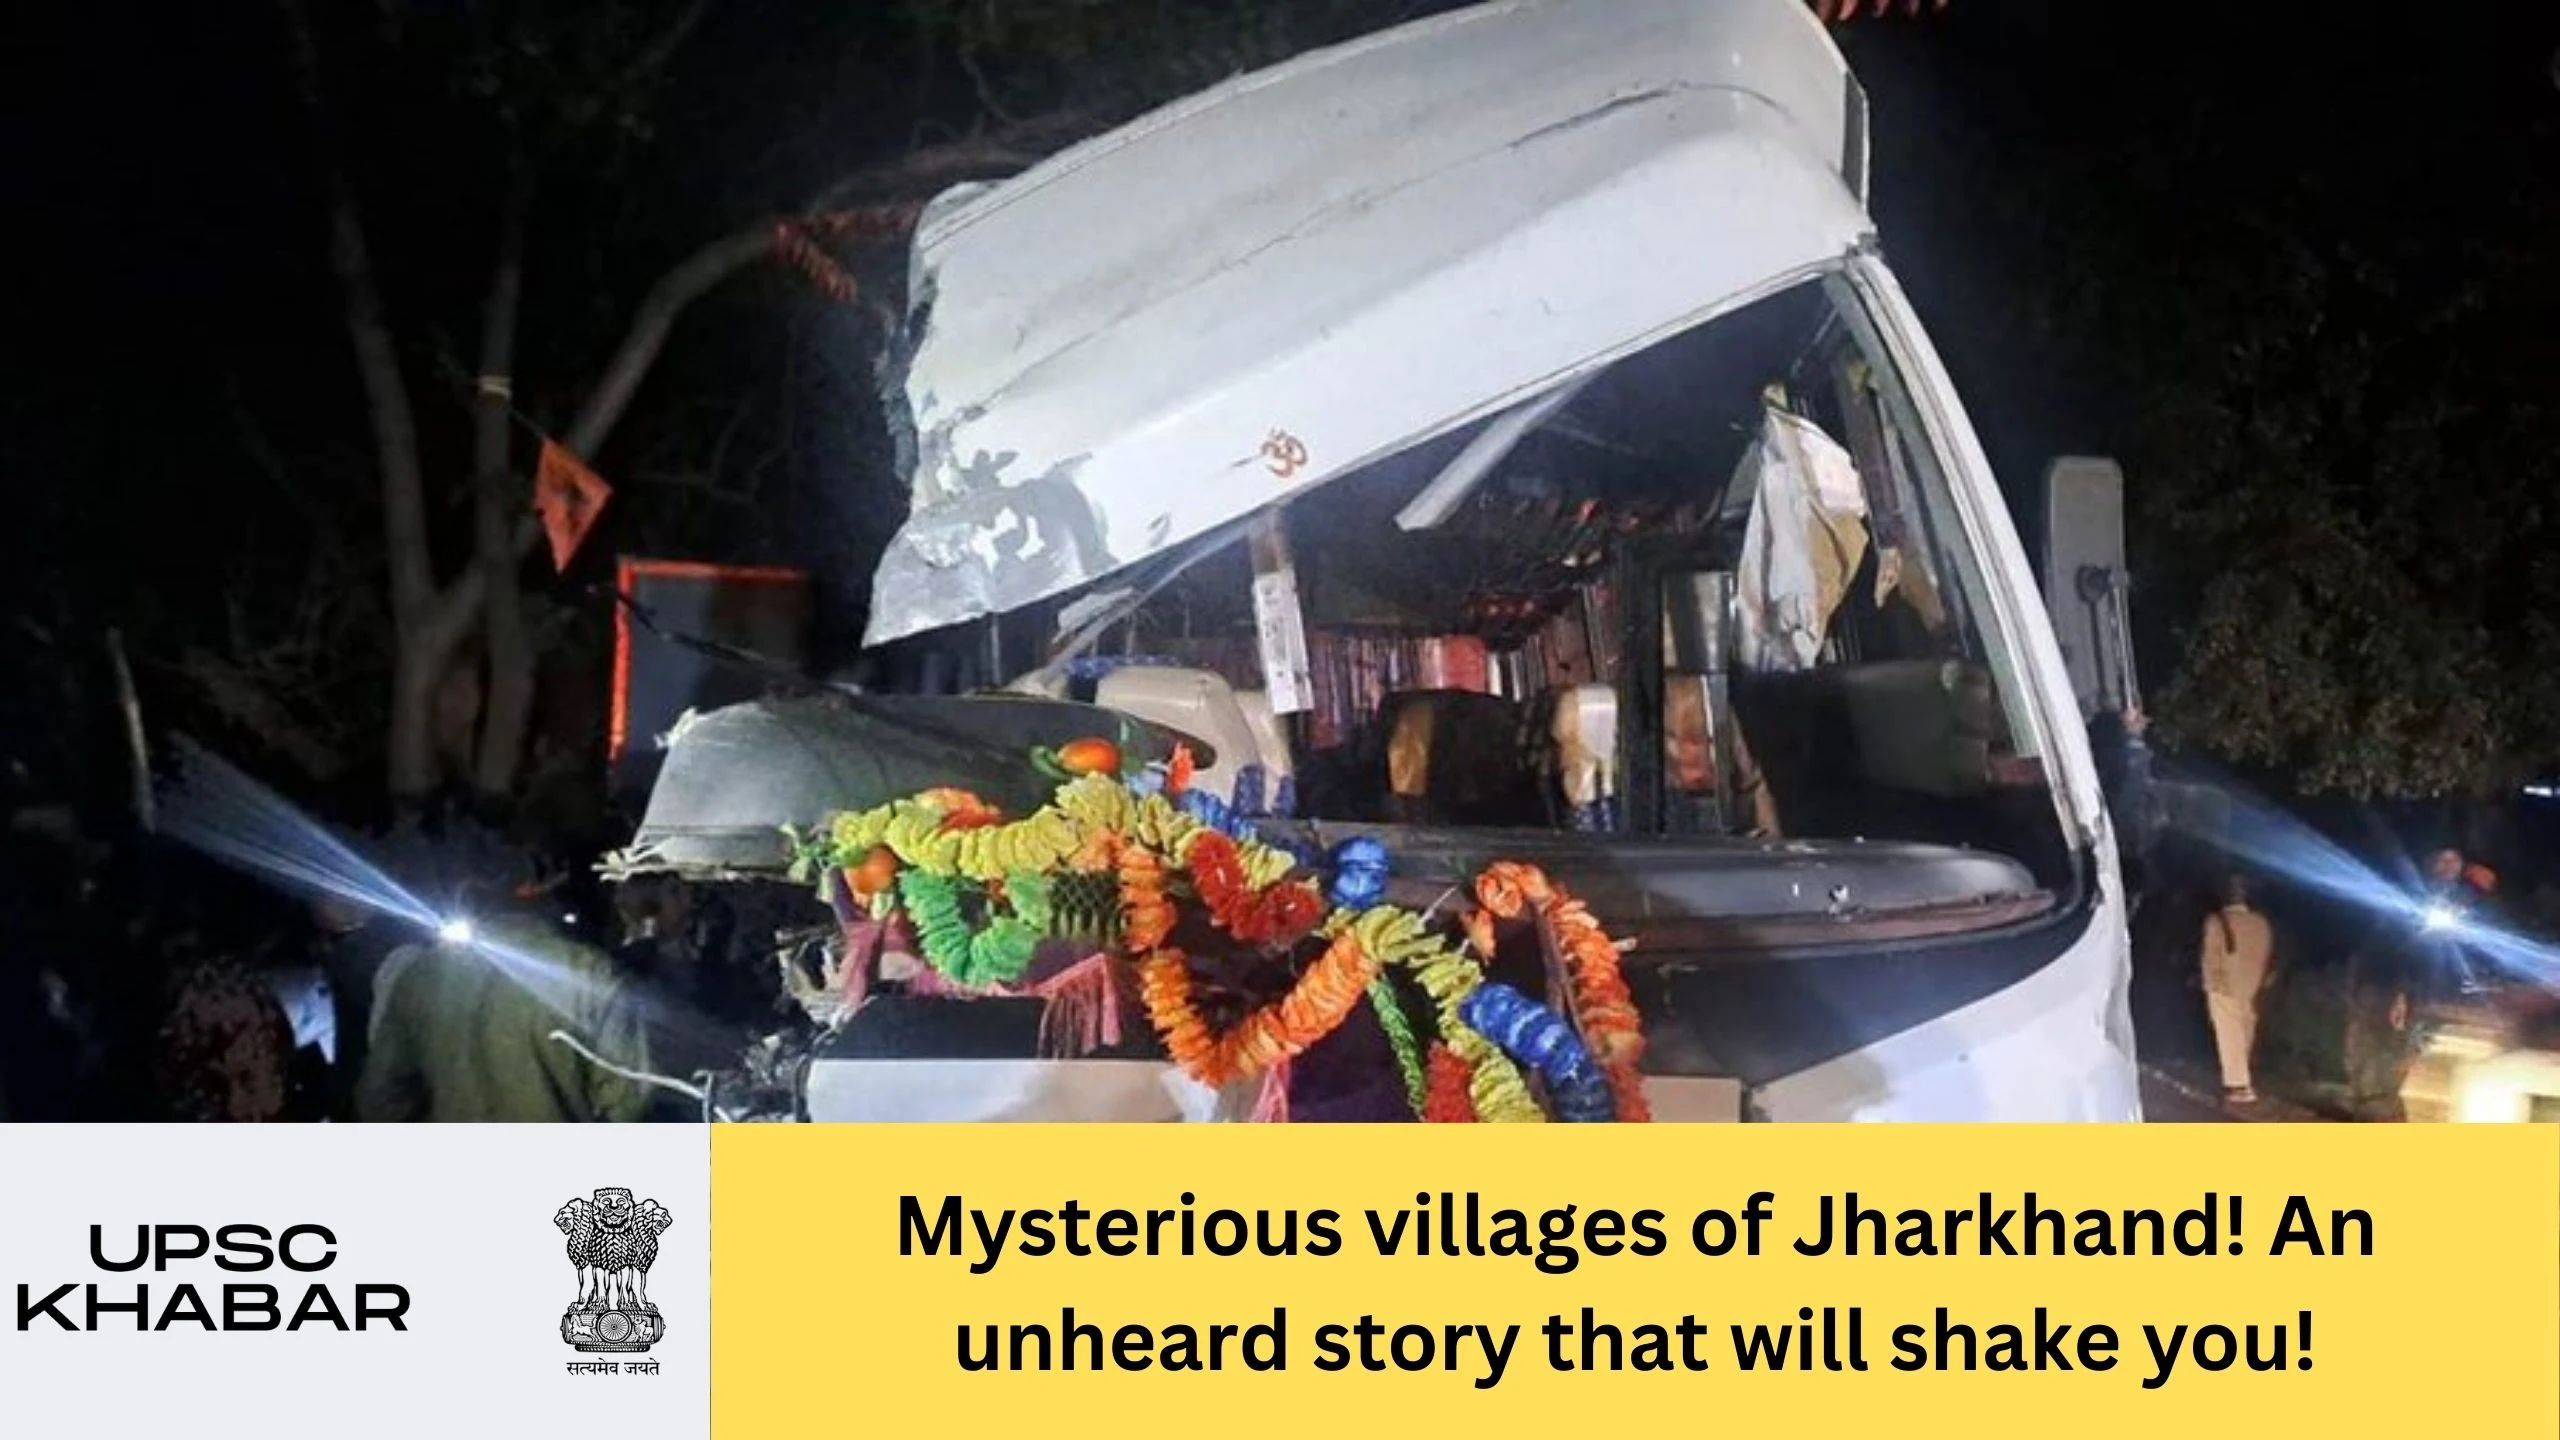 Mysterious villages of Jharkhand! An unheard story that will shake you!